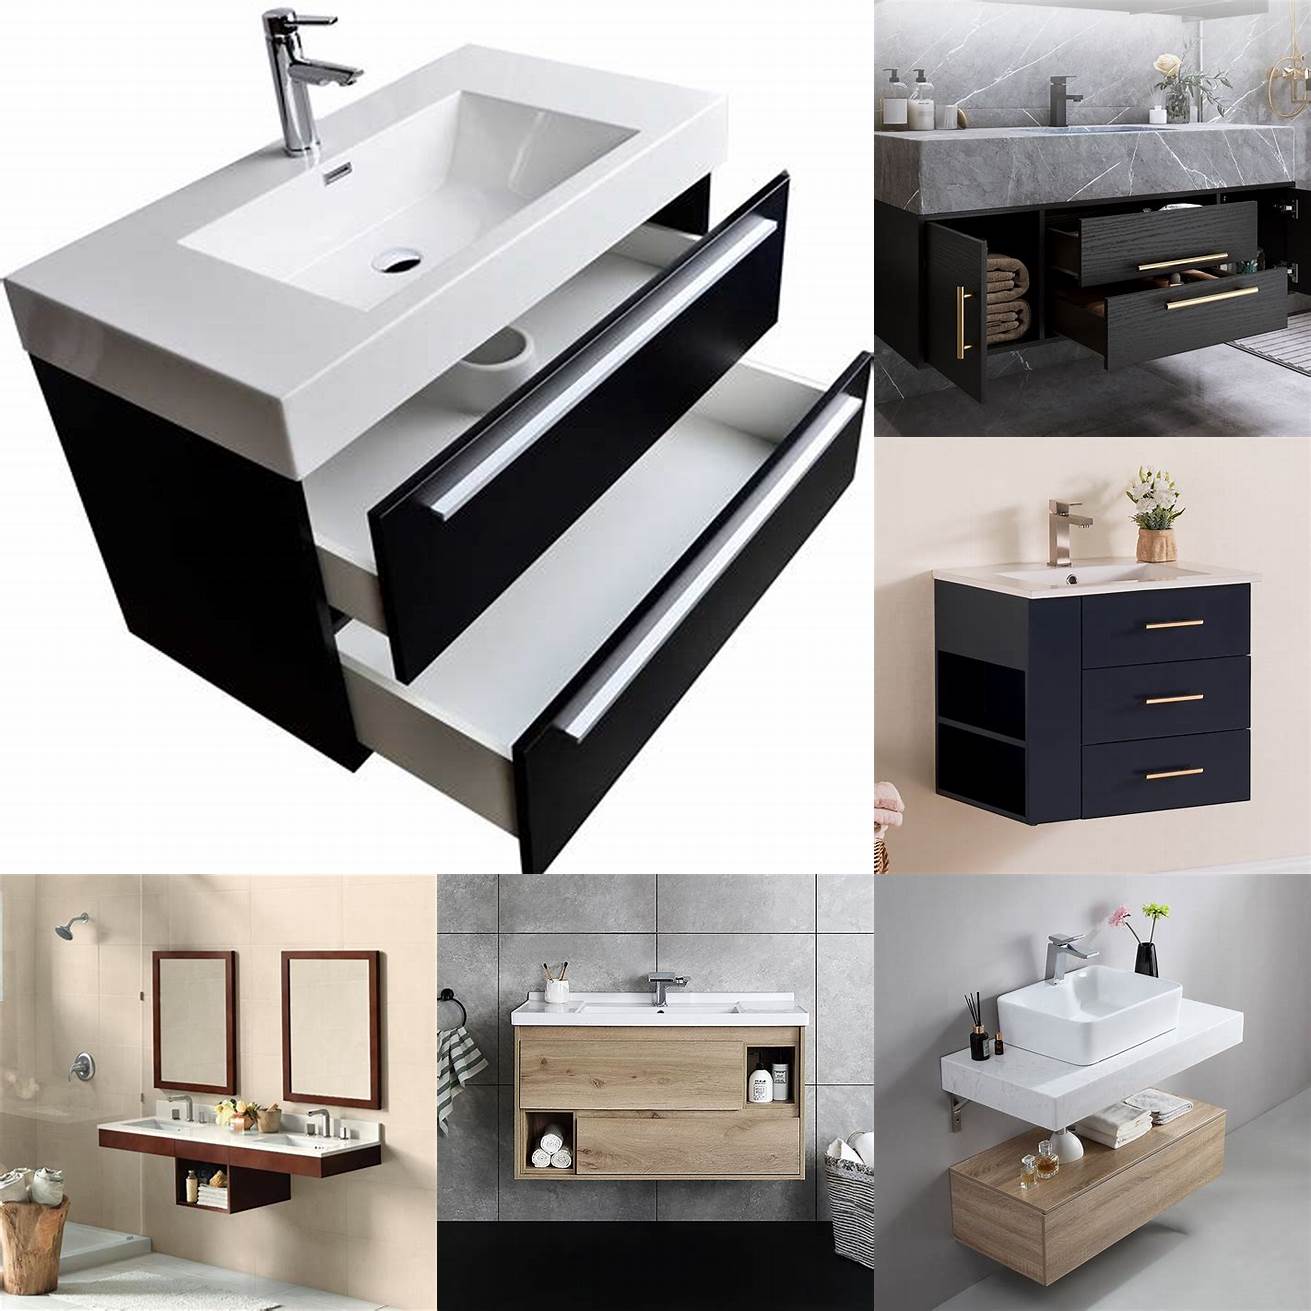 Wall-mounted small bathroom vanity with drawers